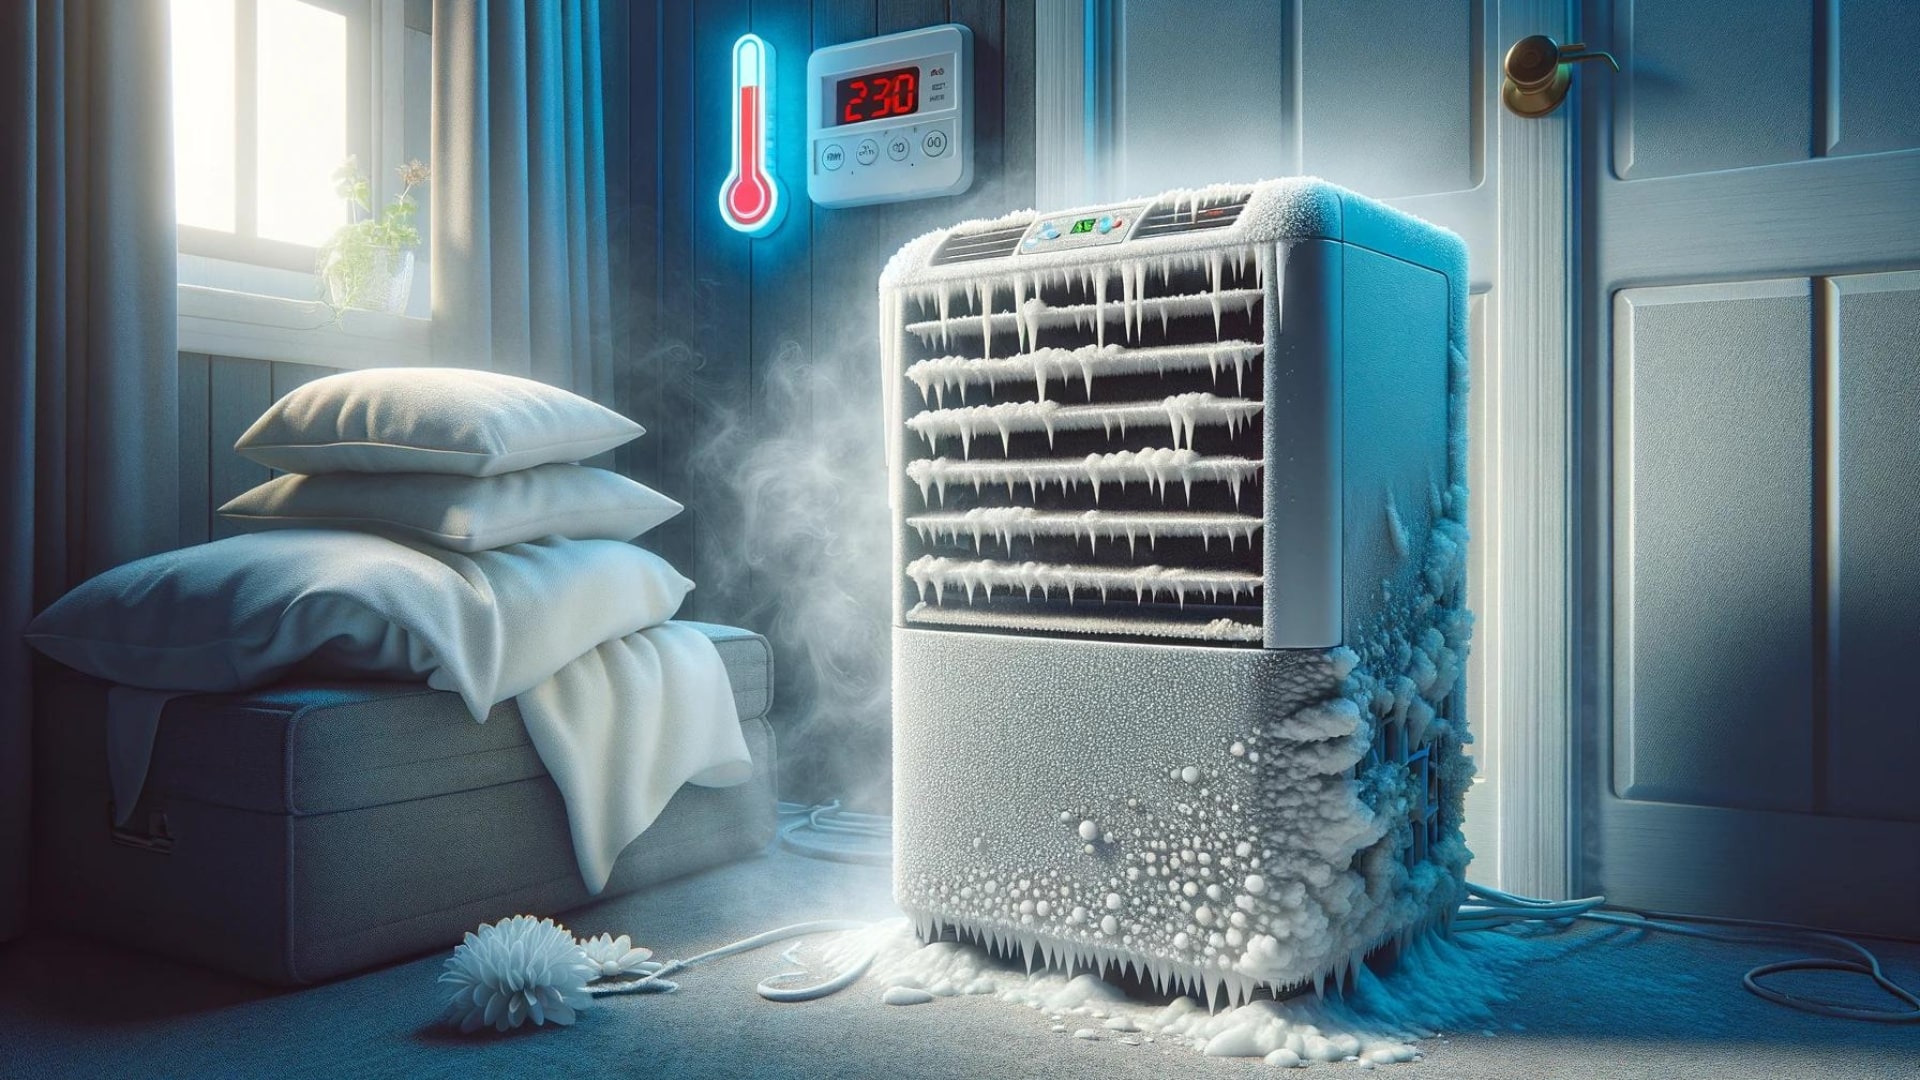 An image showcasing a dehumidifier with visible frost and ice buildup